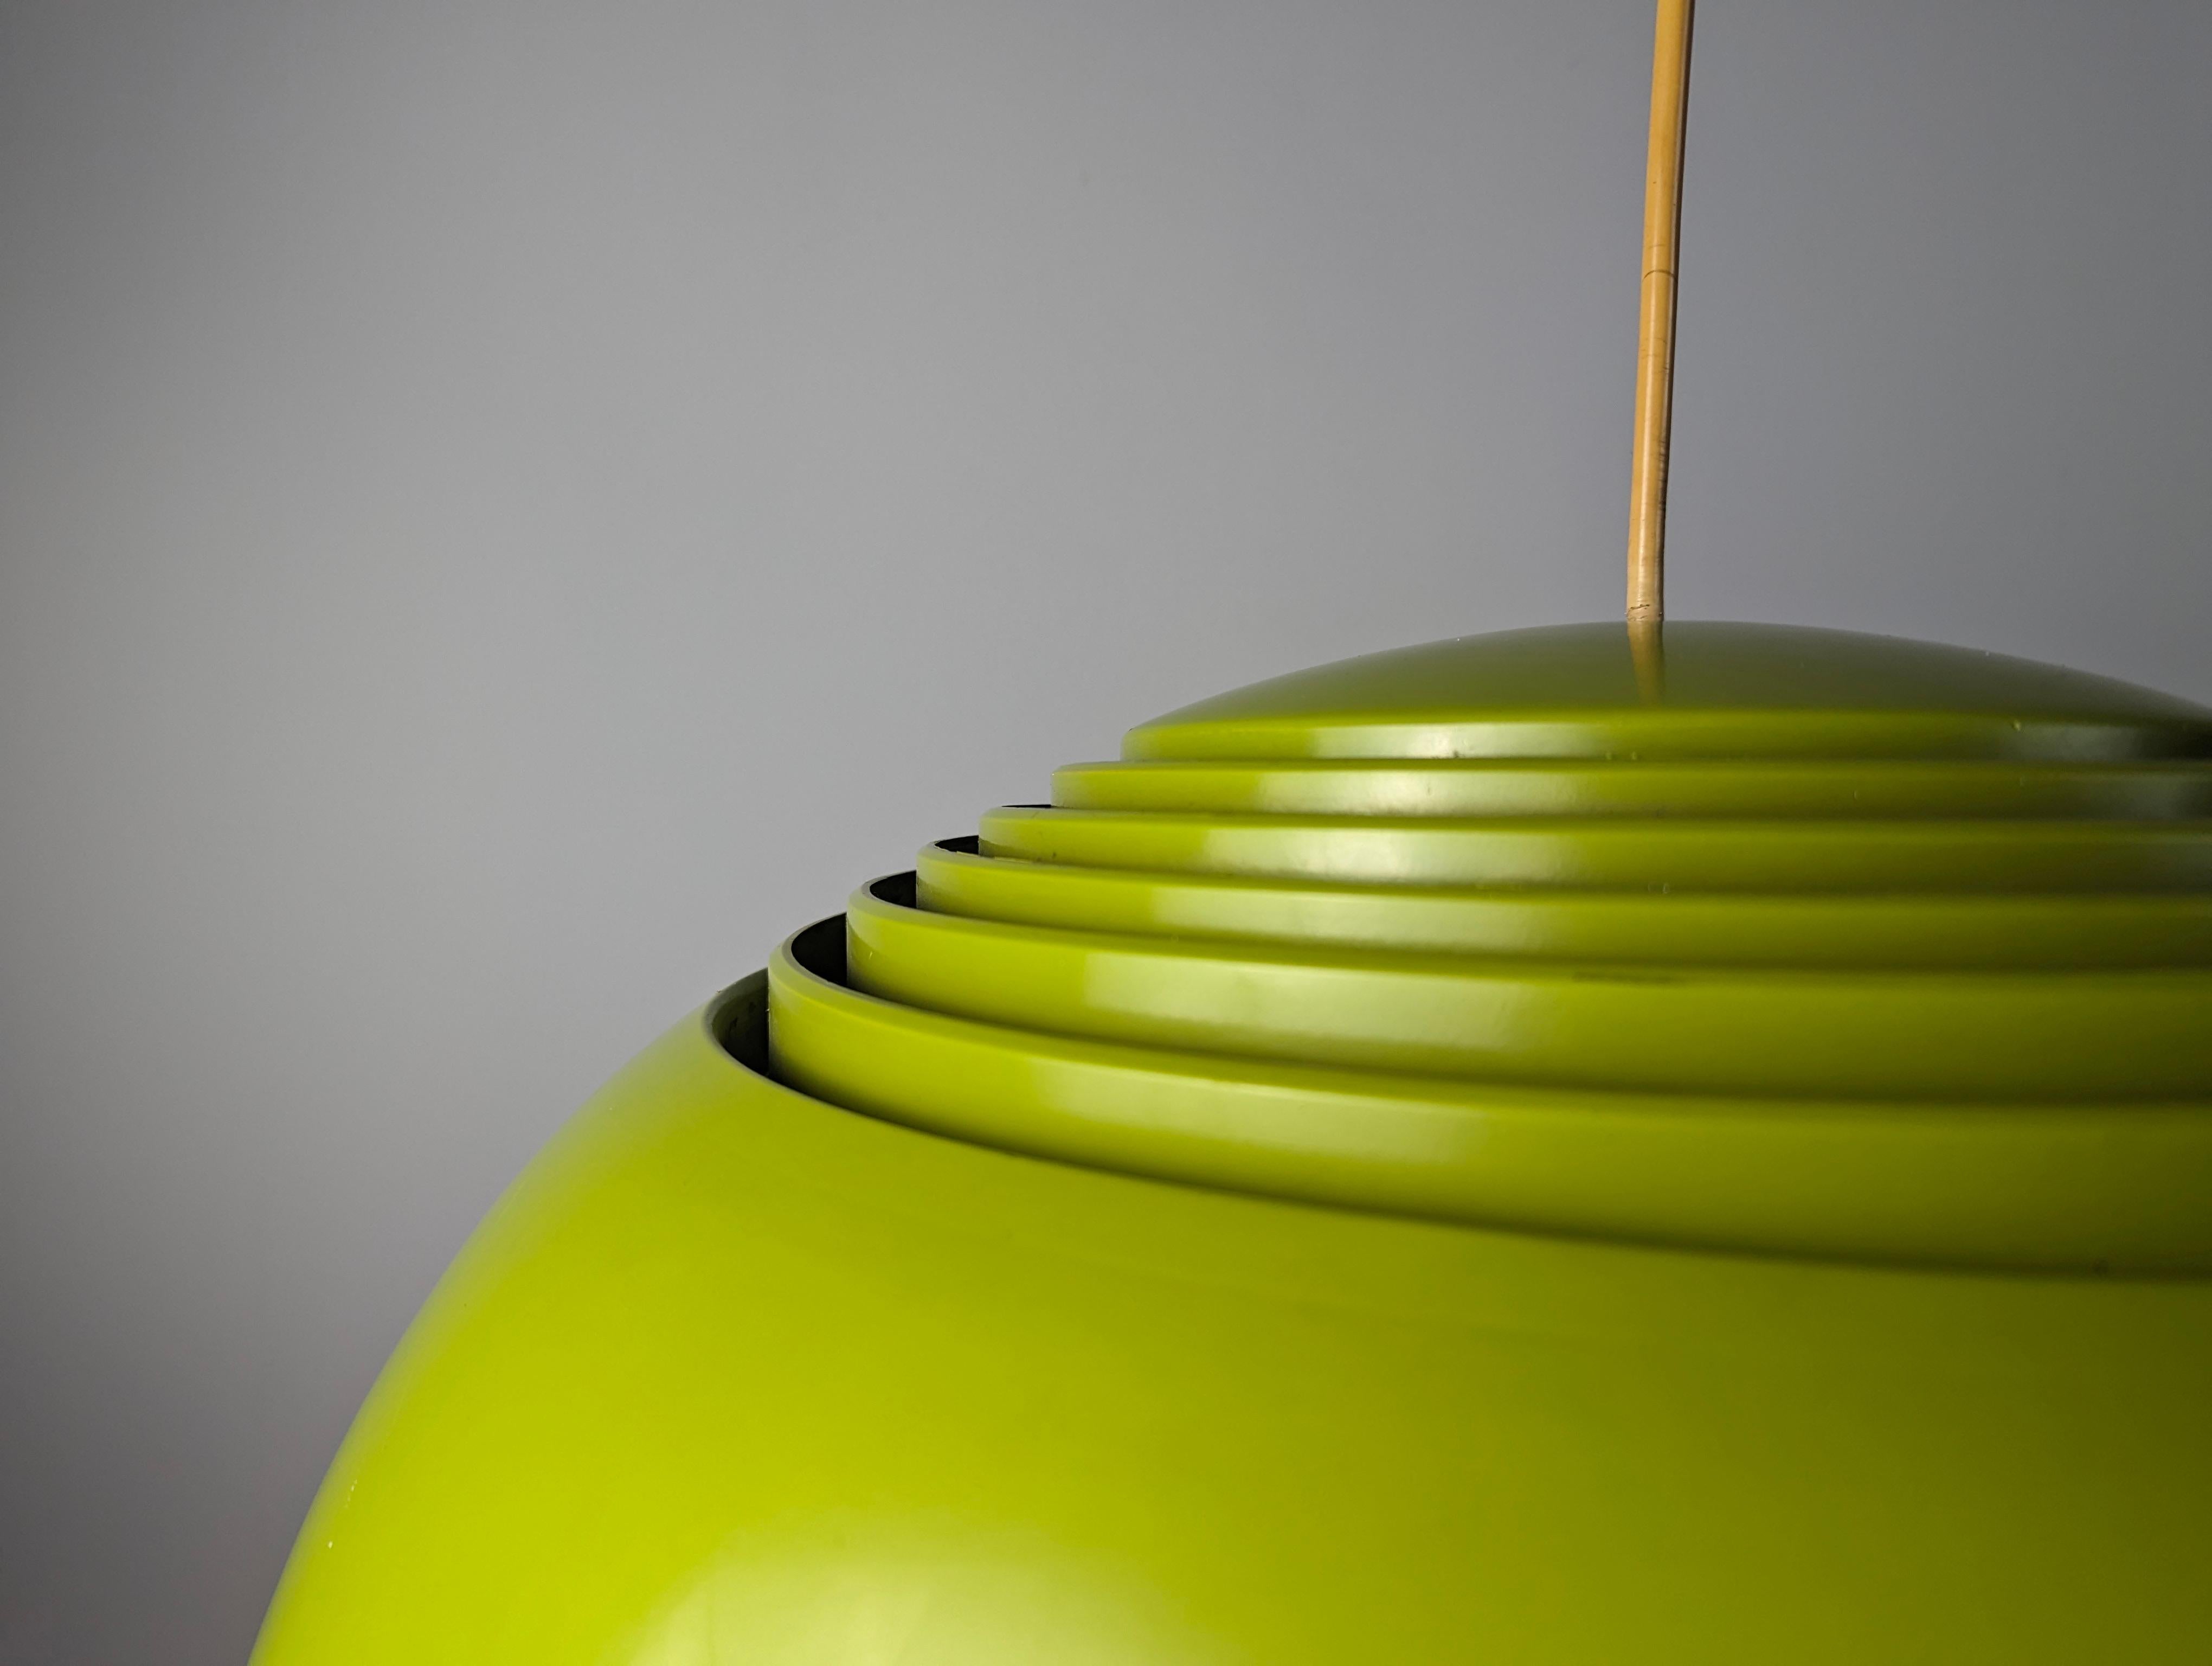 Original AJ Royal pendant lamp from the 60s in lime green color extremely rare and scarce of its production designed by Arne Jacobsen and produced by Louis Poulsen for the SAS Royal Hotel in Copenhagen, the AJ Royal is an icon that follows the